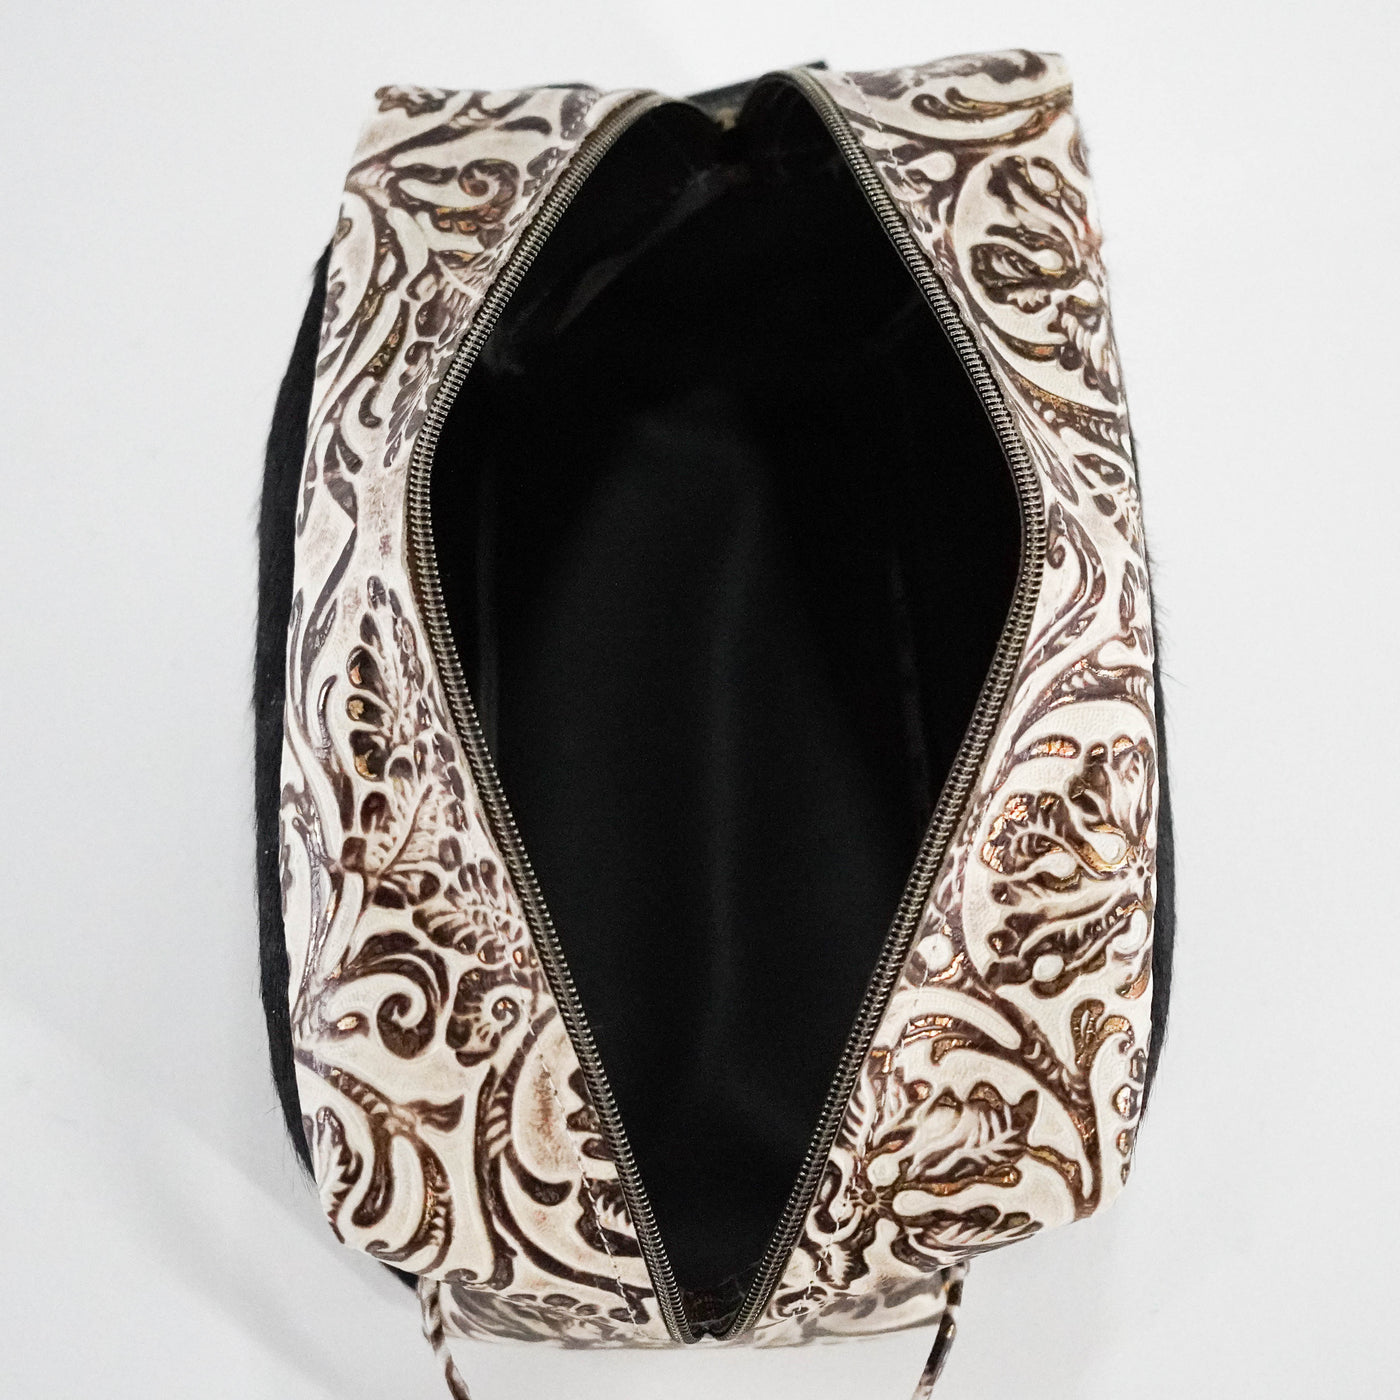 Dutton - Black w/ Ivory Tool-Dutton-Western-Cowhide-Bags-Handmade-Products-Gifts-Dancing Cactus Designs